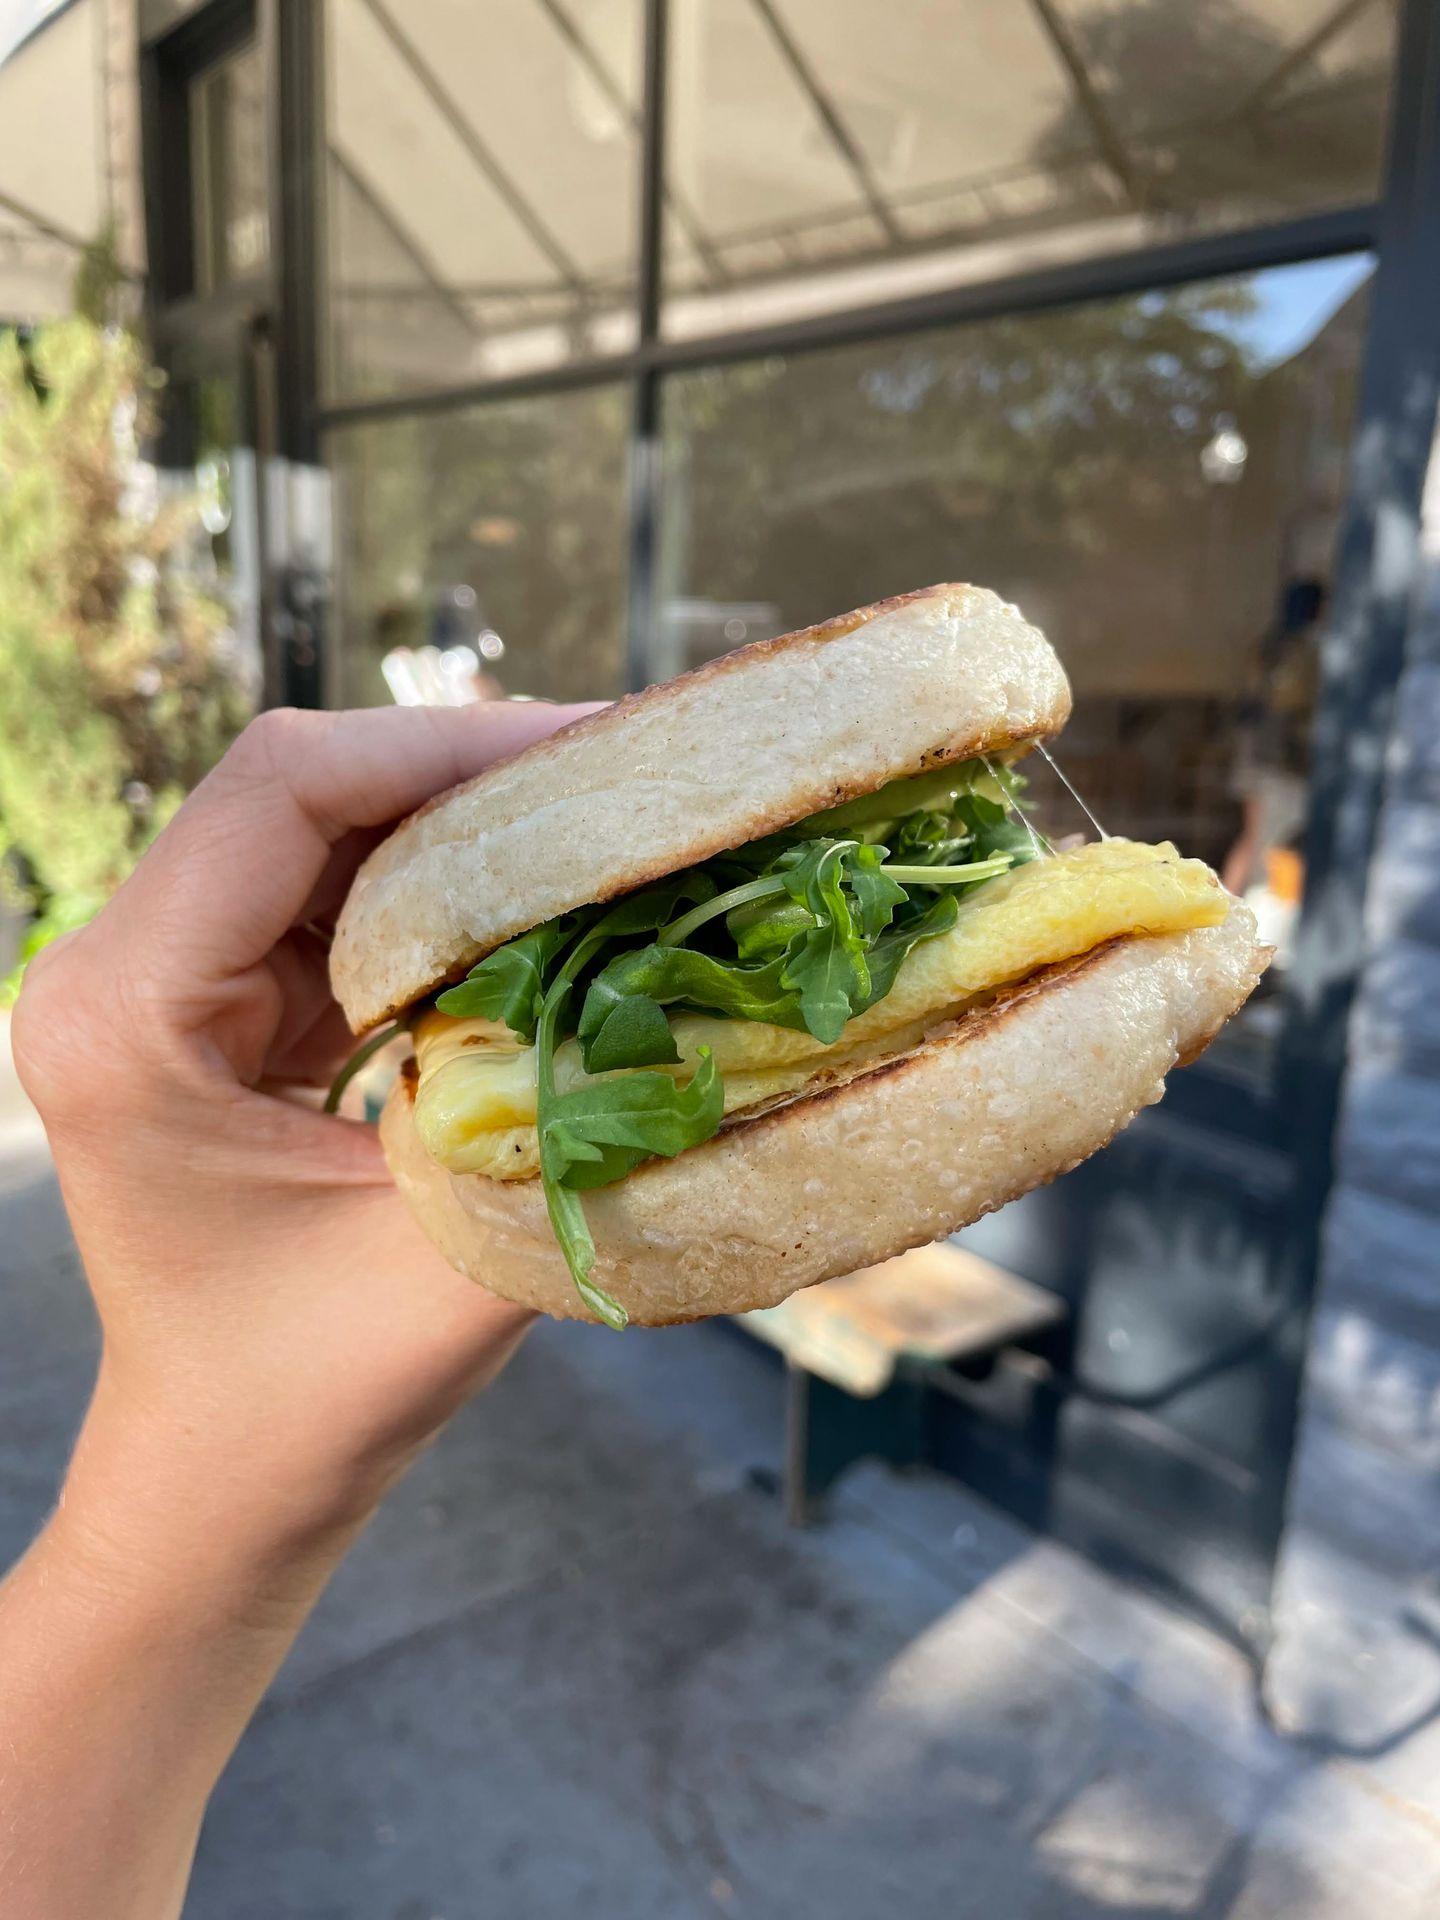 Holding up a breakfast sandwich on an english muffin from Certified Kitchen and Bakery.